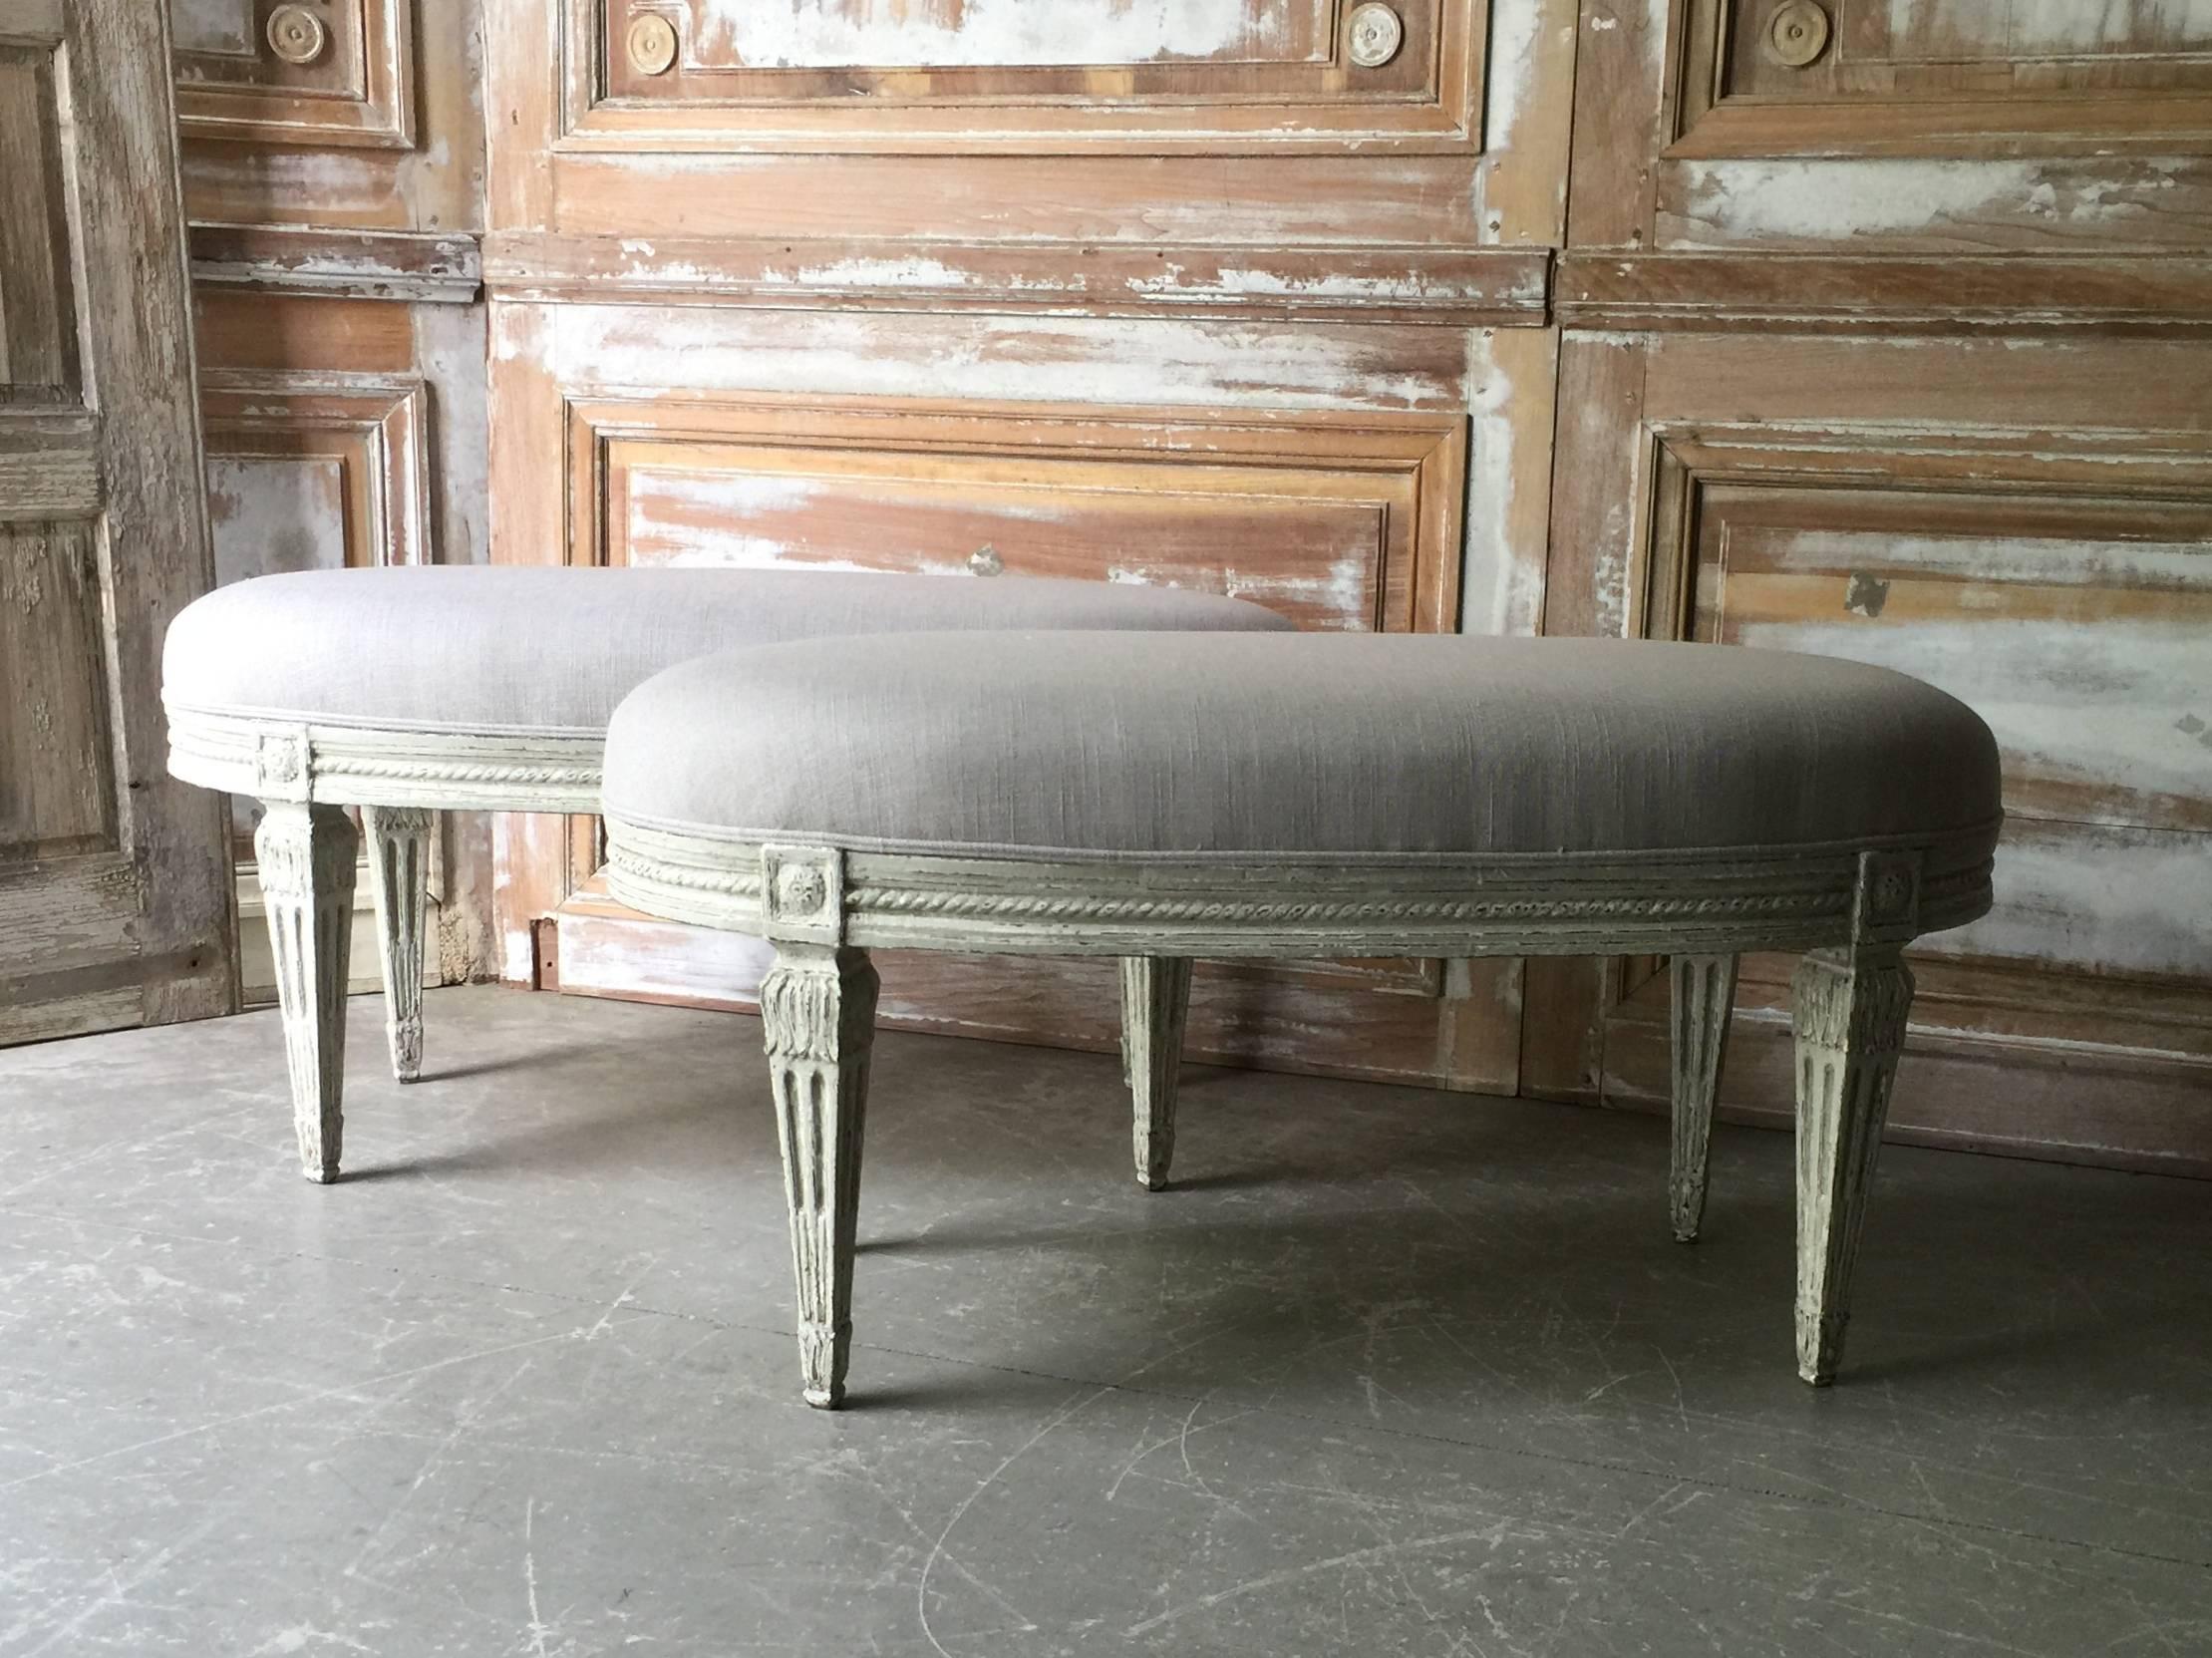 Pair of Louis XVI style French benches in oval shape with richly carved frieze and fluted tapered legs. Upholstered in linen.
Condition: Excellent.